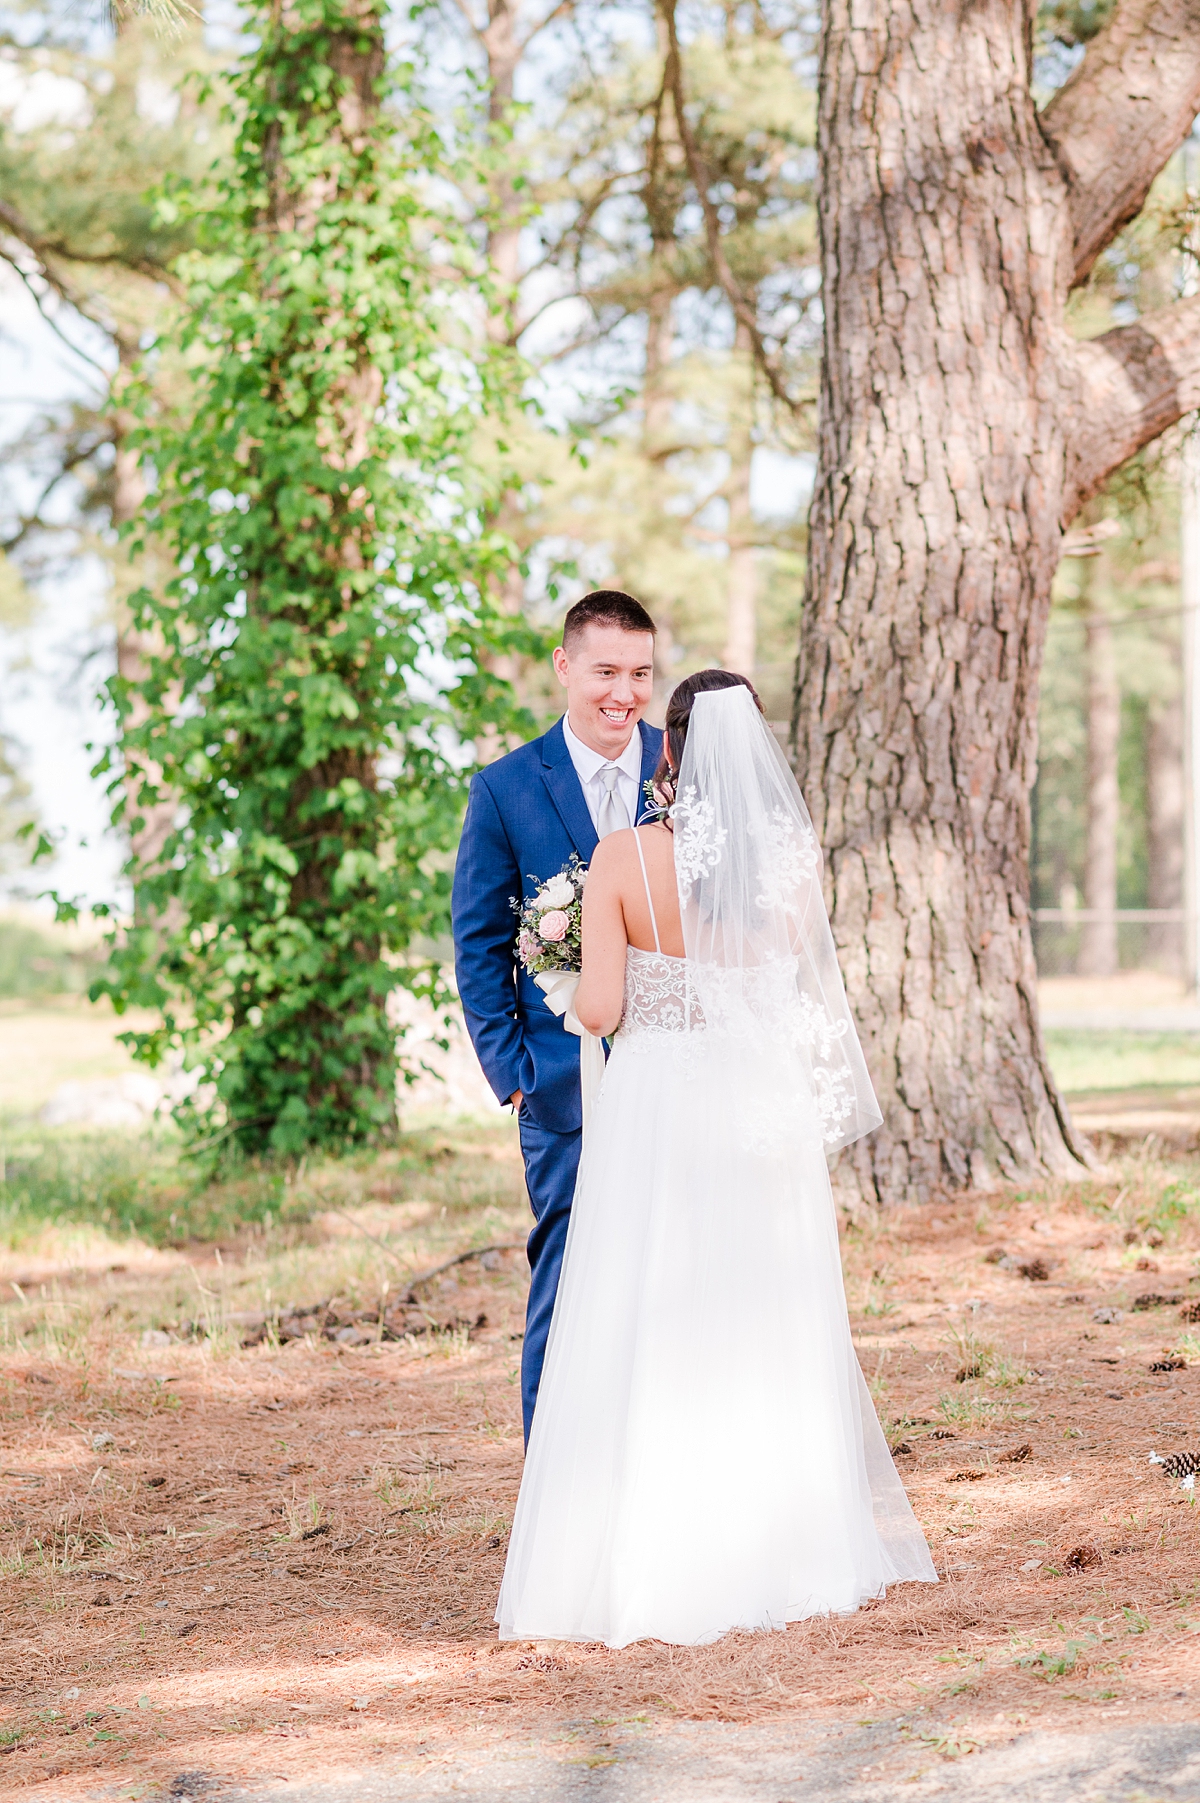 Bride and Groom First Look at Spring Hanover wedding. Hanover Wedding Photographer Kailey Brianne Photography. 